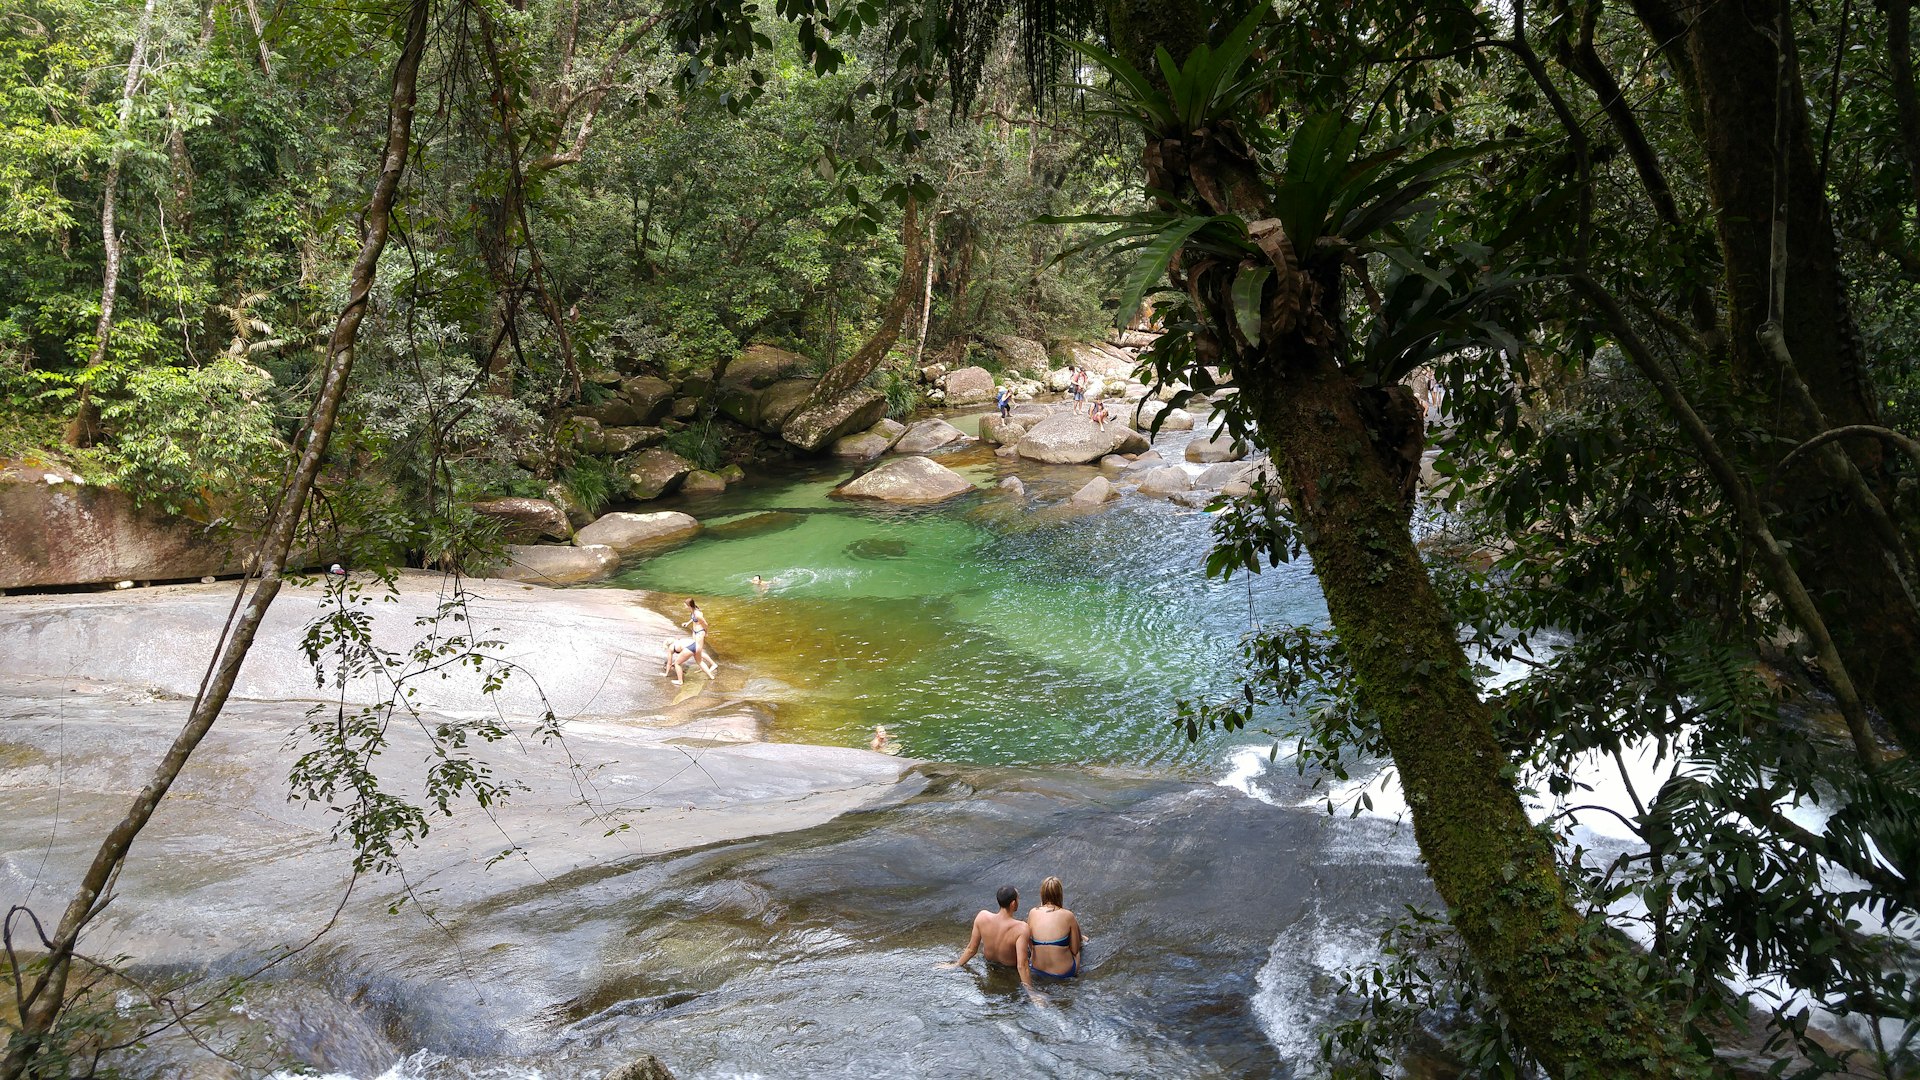 People bathing at Josephine Falls, a tiered cascade waterfall on Josephine Creek located in the Far North region of Queensland